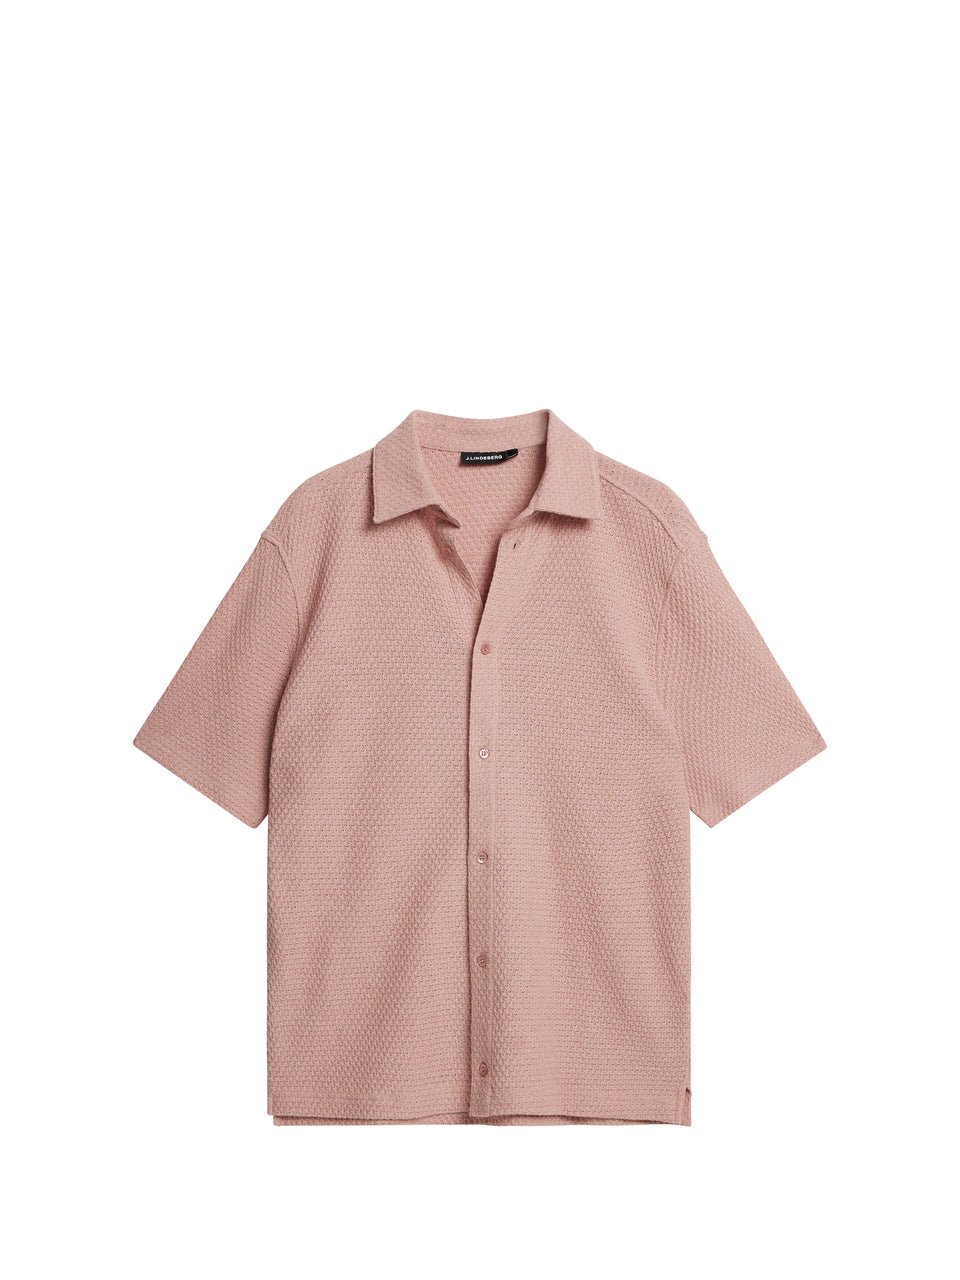 Torpa Airy Structure Shirt / Powder Pink